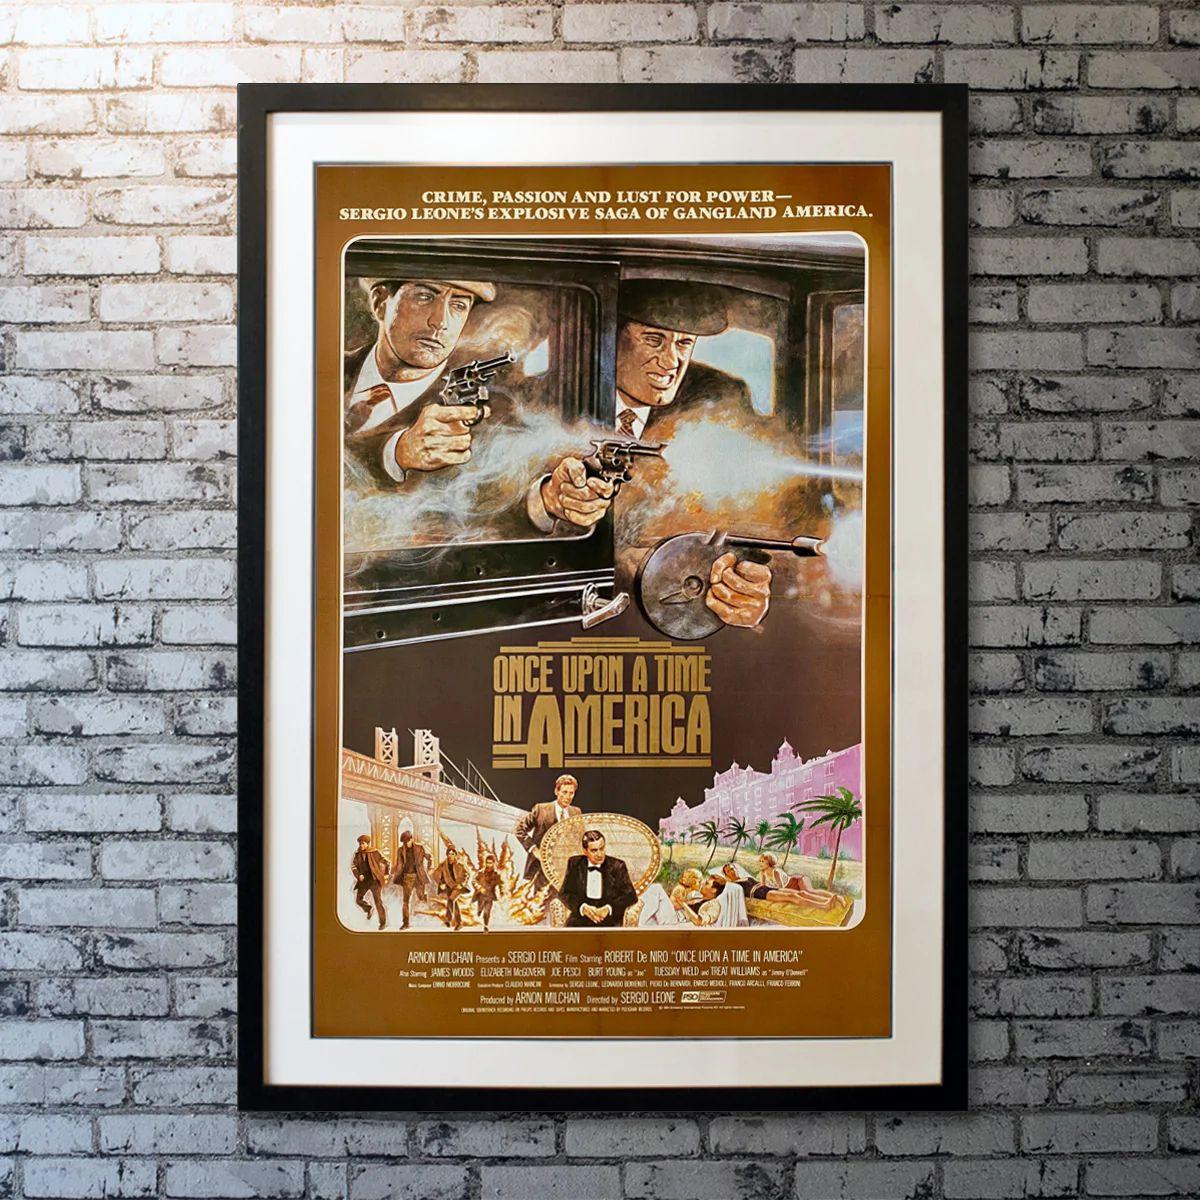 Once Upon A Time In America, Unframed Poster, 1984

Original One Sheet (27 x 41 inches). A former Prohibition-era Jewish gangster returns to the Lower East Side of Manhattan 35 years later, where he must once again confront the ghosts and regrets